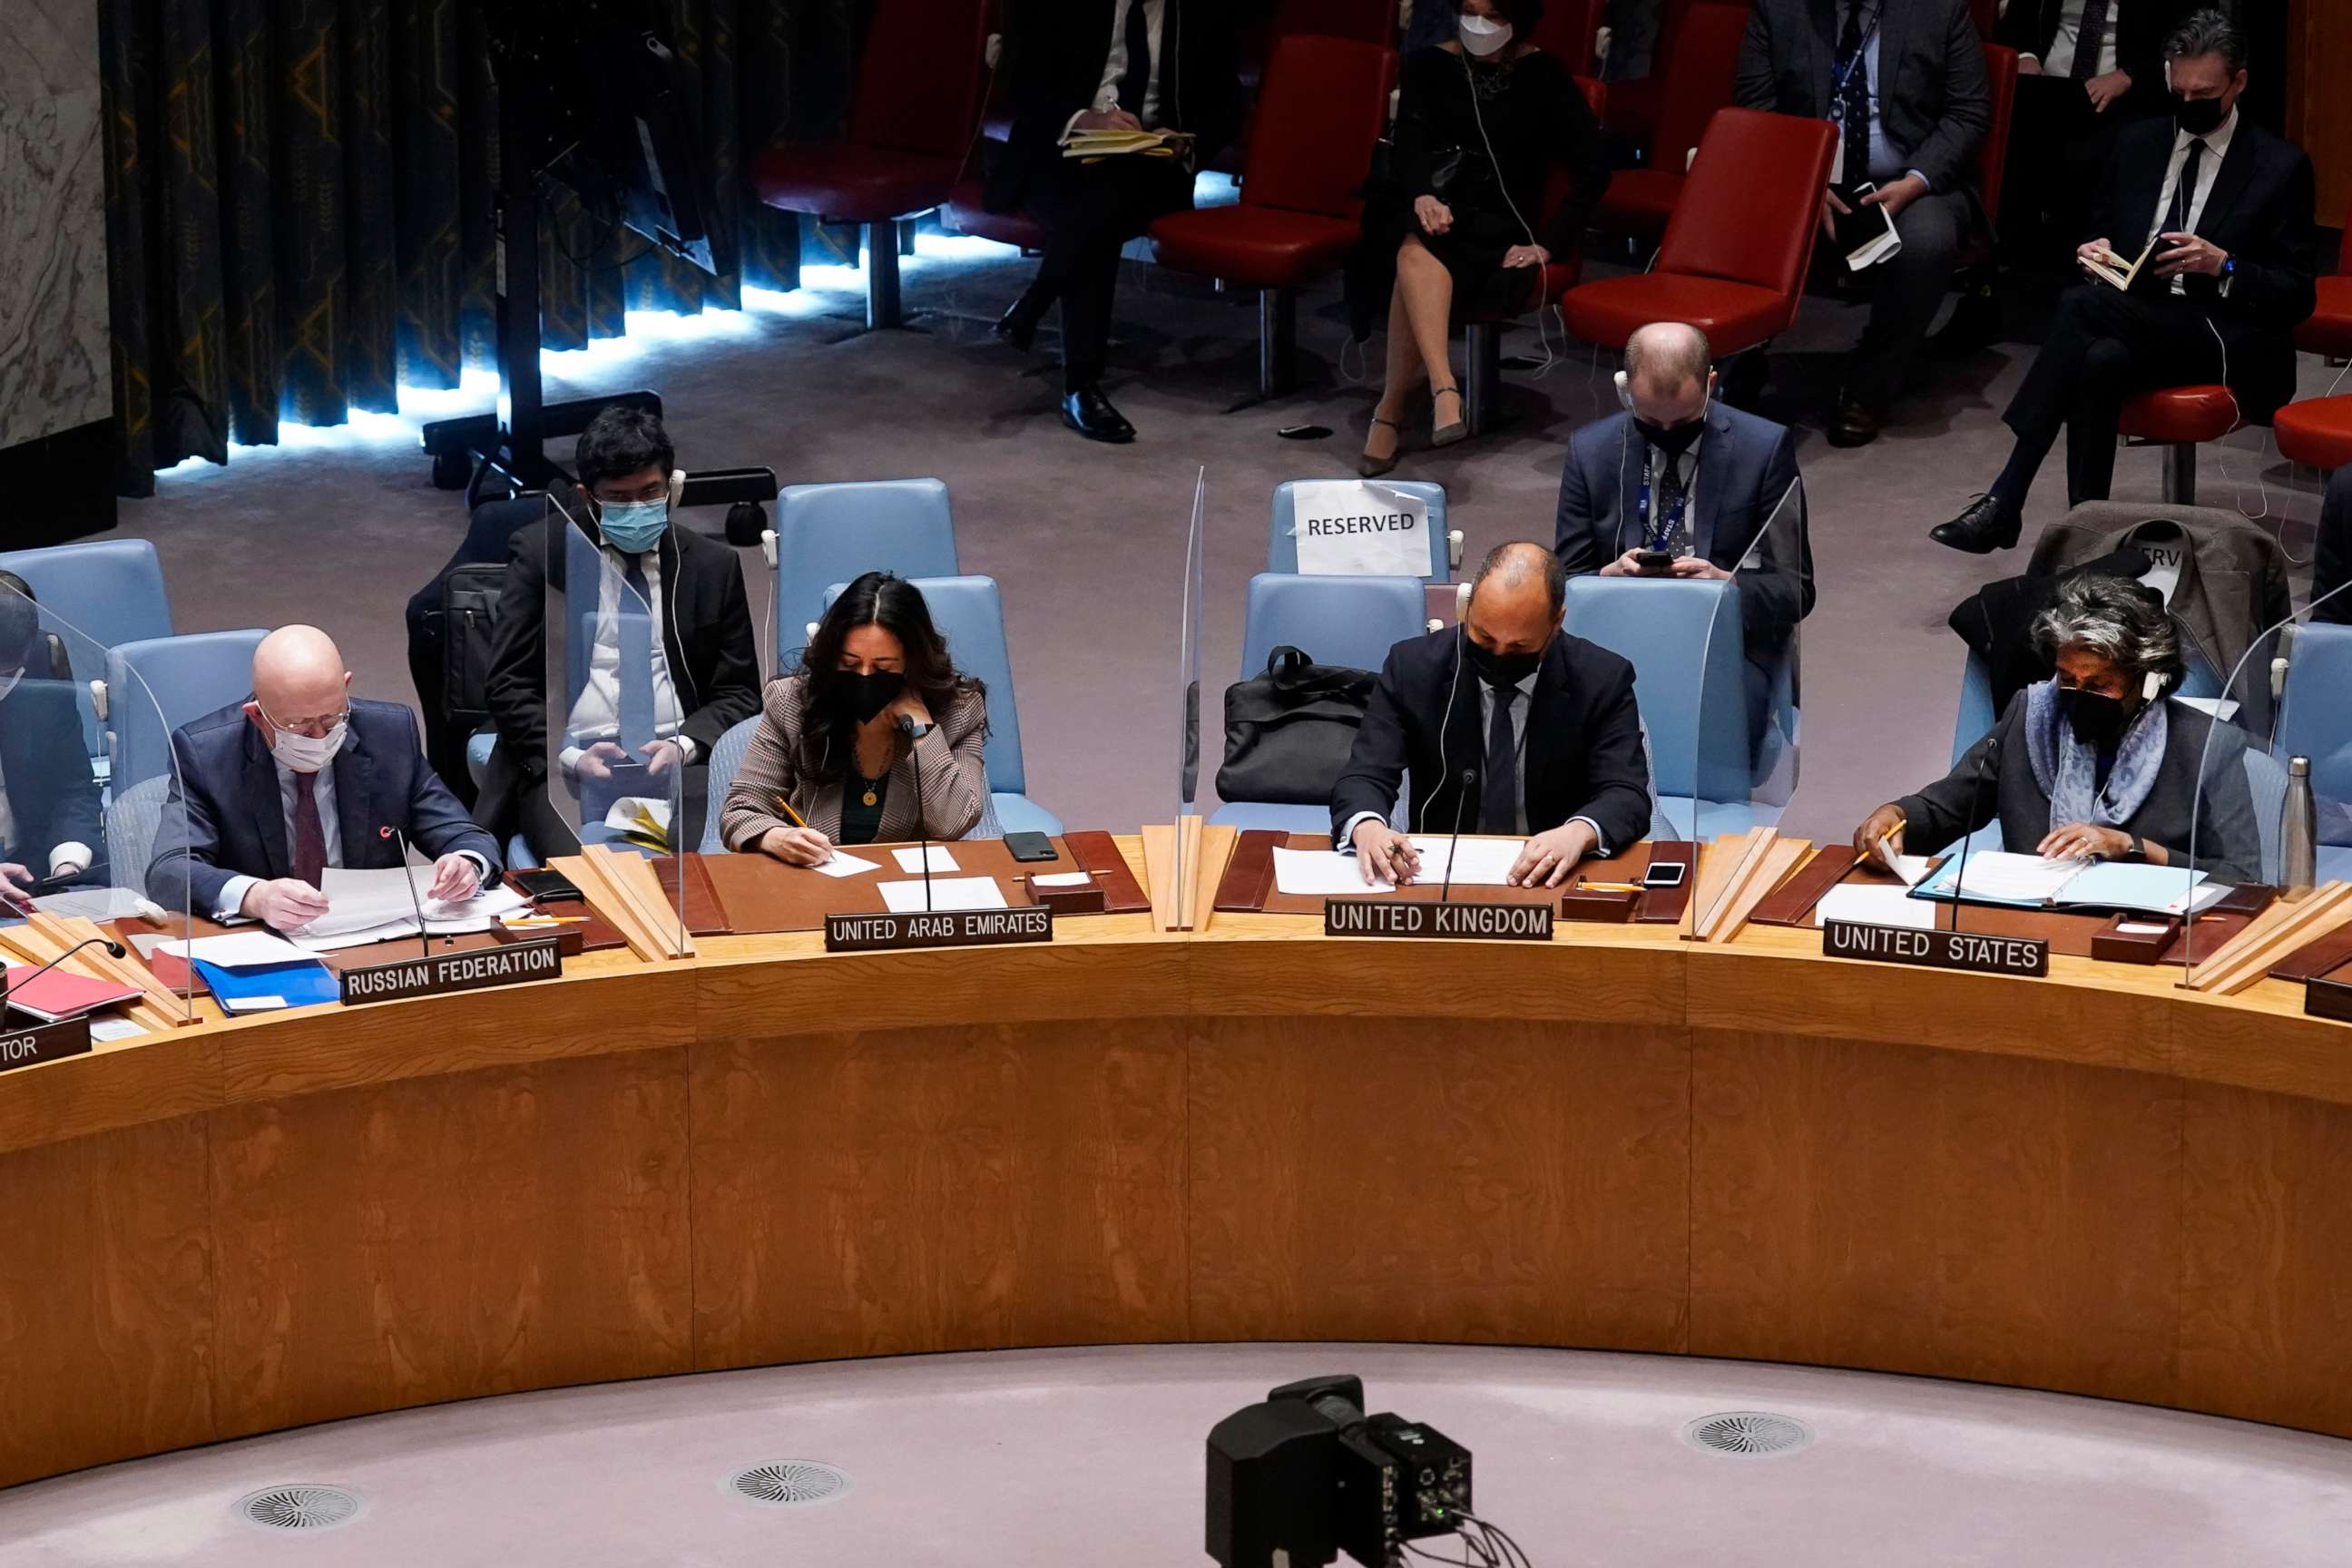 PHOTO: Russia's UN Ambassador Vasily Nebenzya, left, addresses the United Nations Security Council, before a vote, as United Staes Ambassador Linda Thomas-Greenfield listens, at right, Jan. 31, 2022.